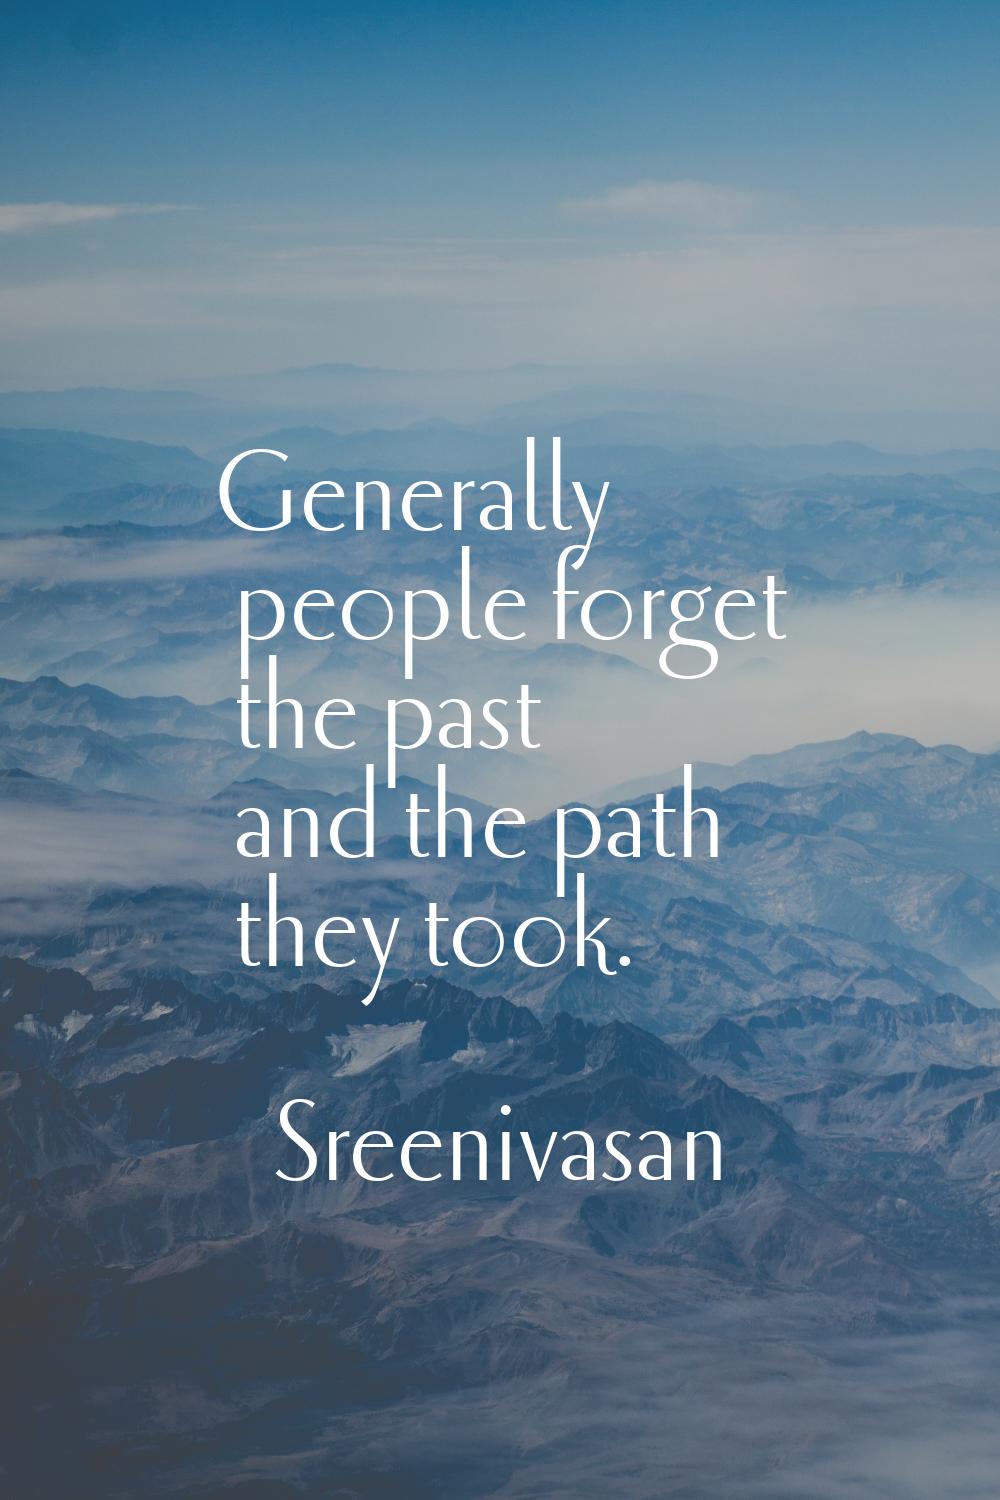 Generally people forget the past and the path they took.